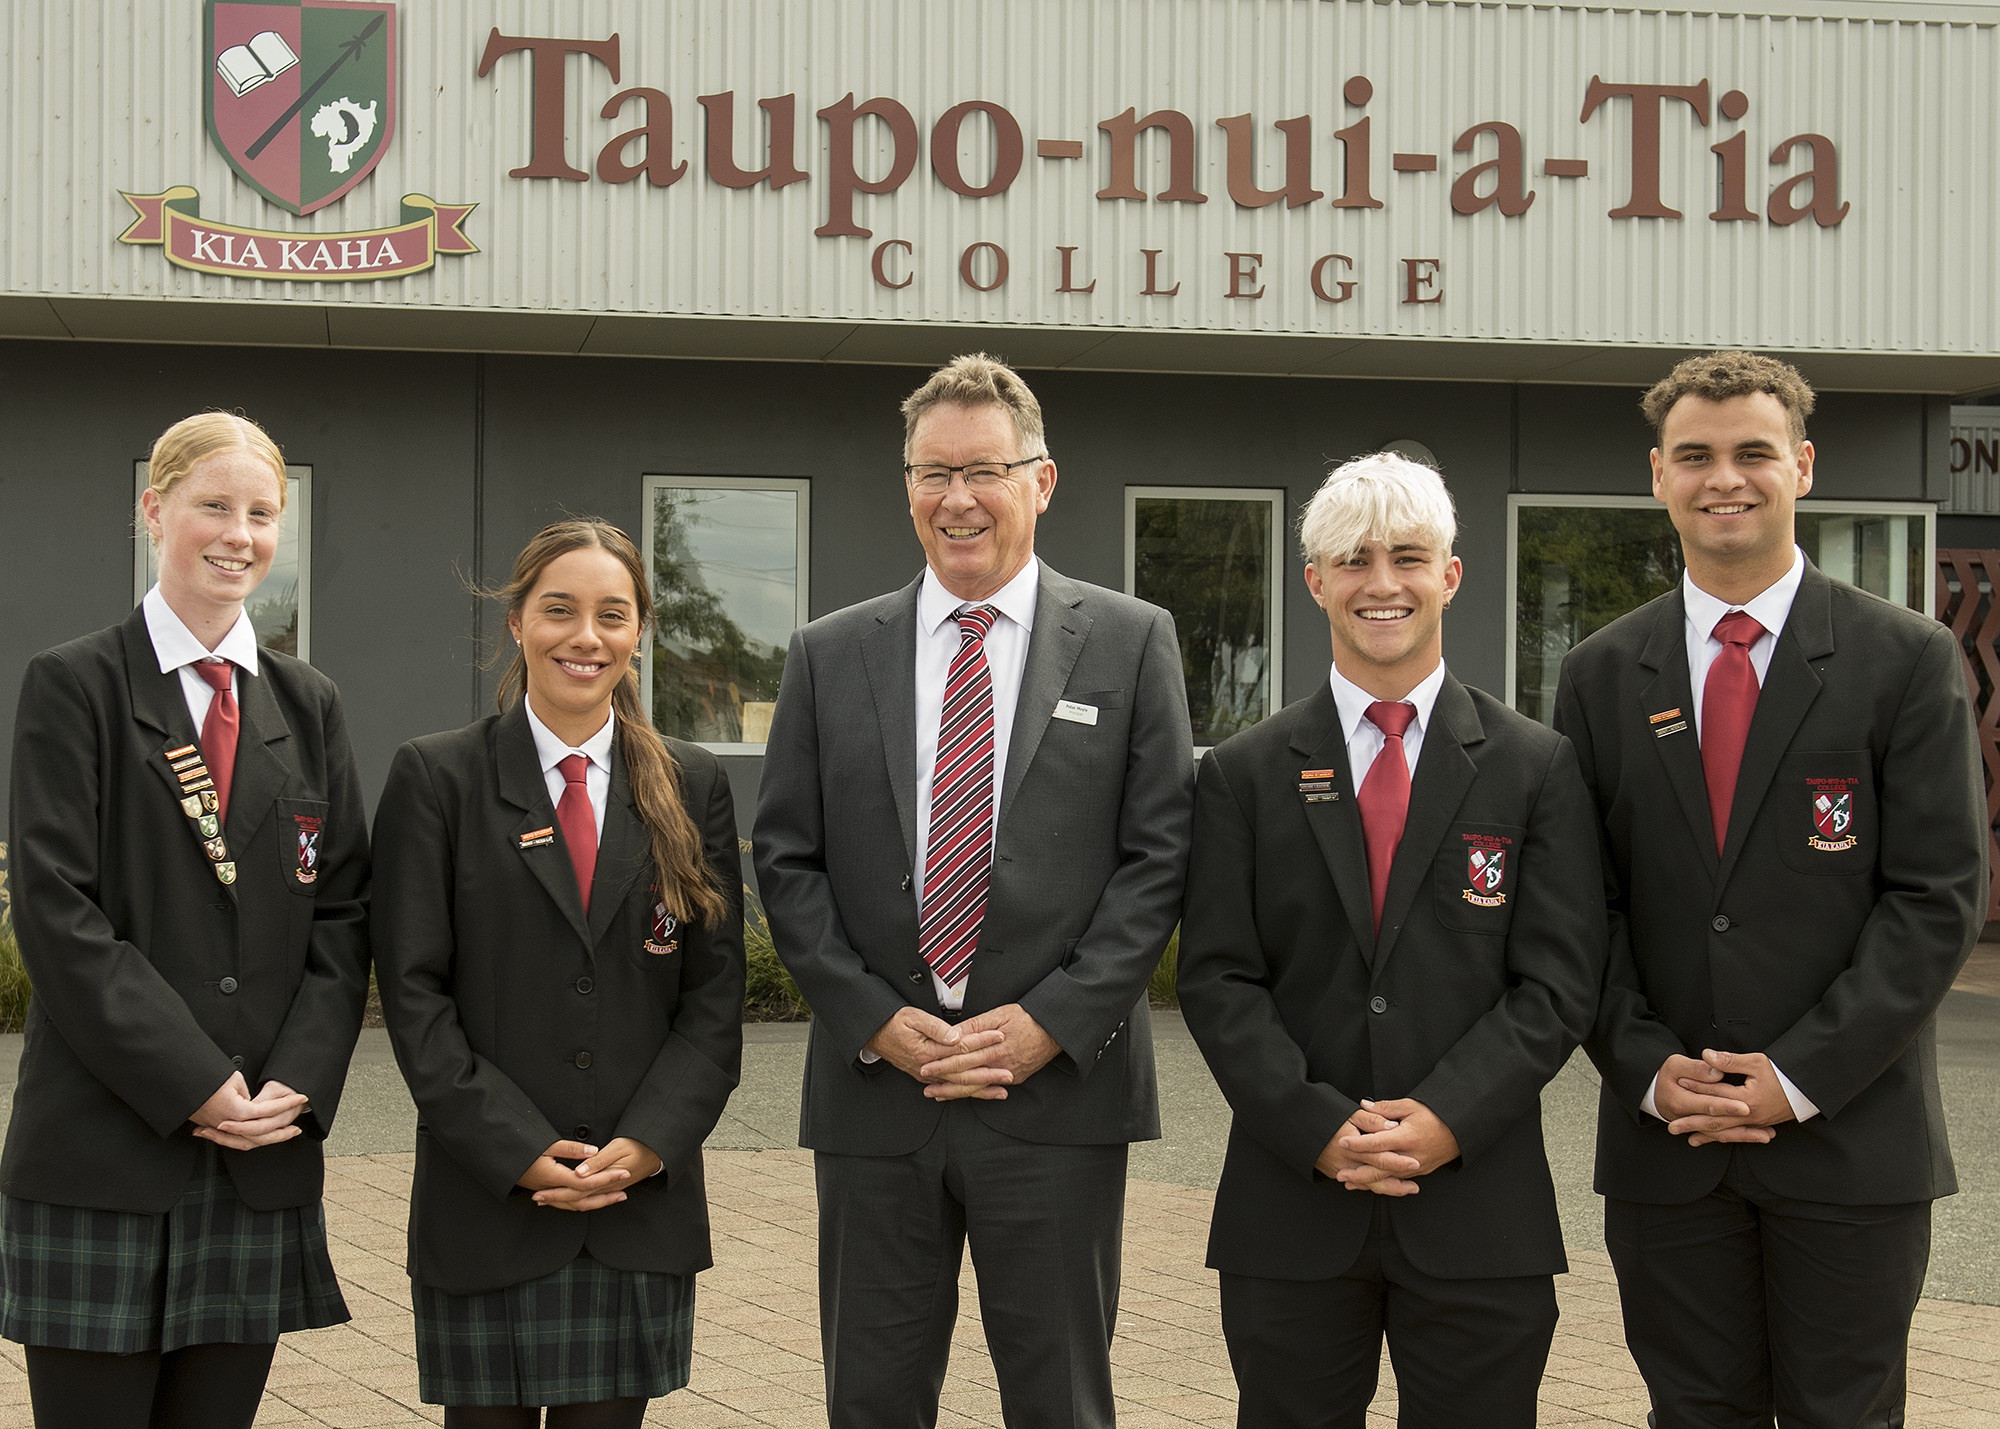 Announcing Taupo-nui-a-Tia College 2021 Head Students